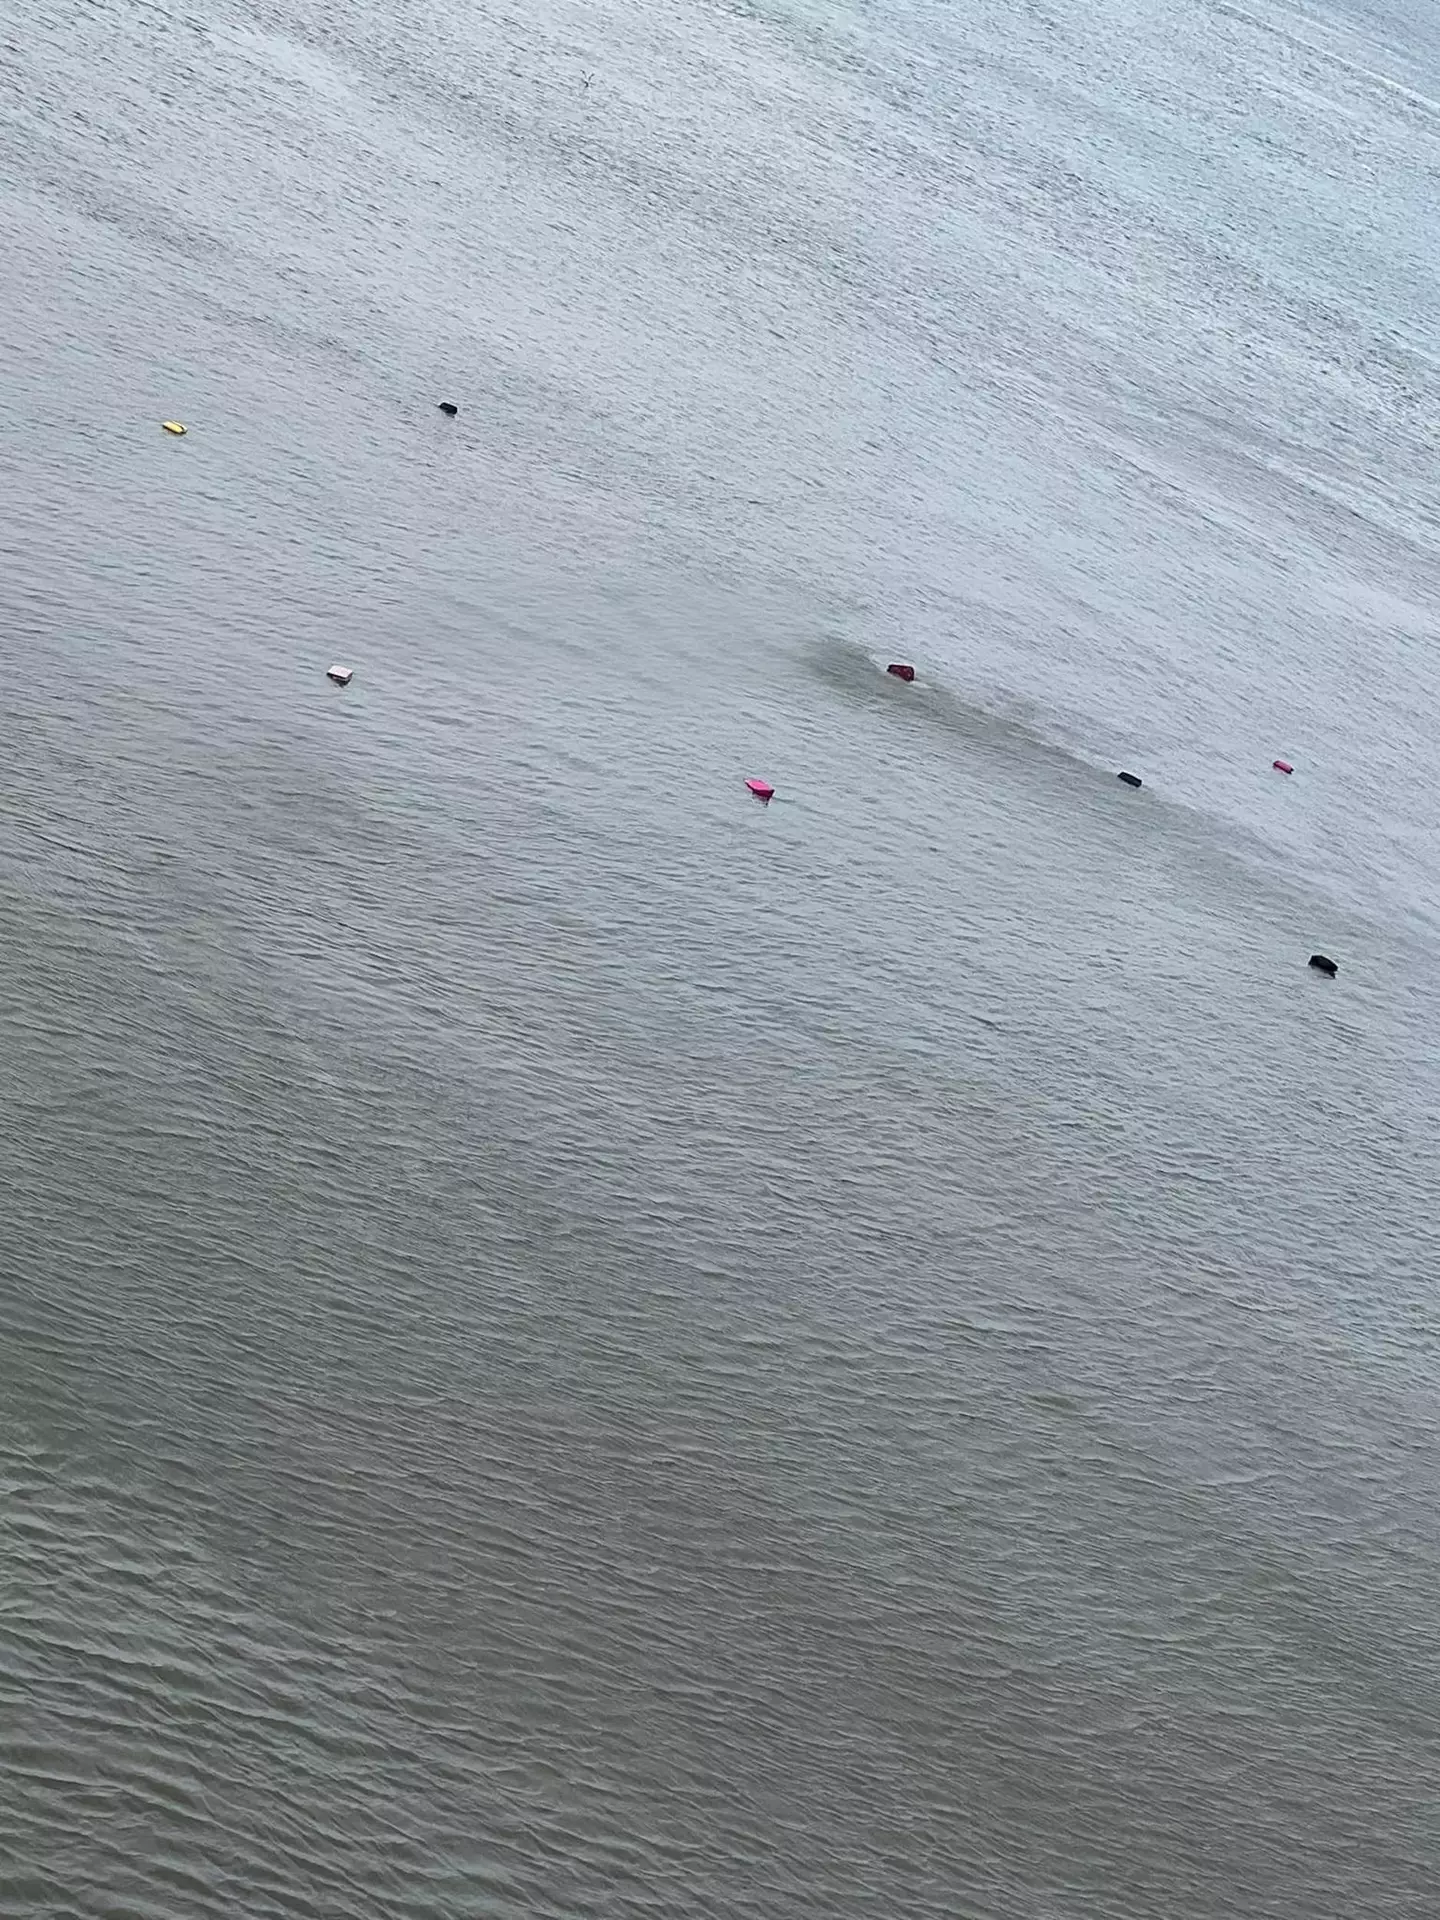 Passengers spotted objects floating in the water while they prepared to disembark.